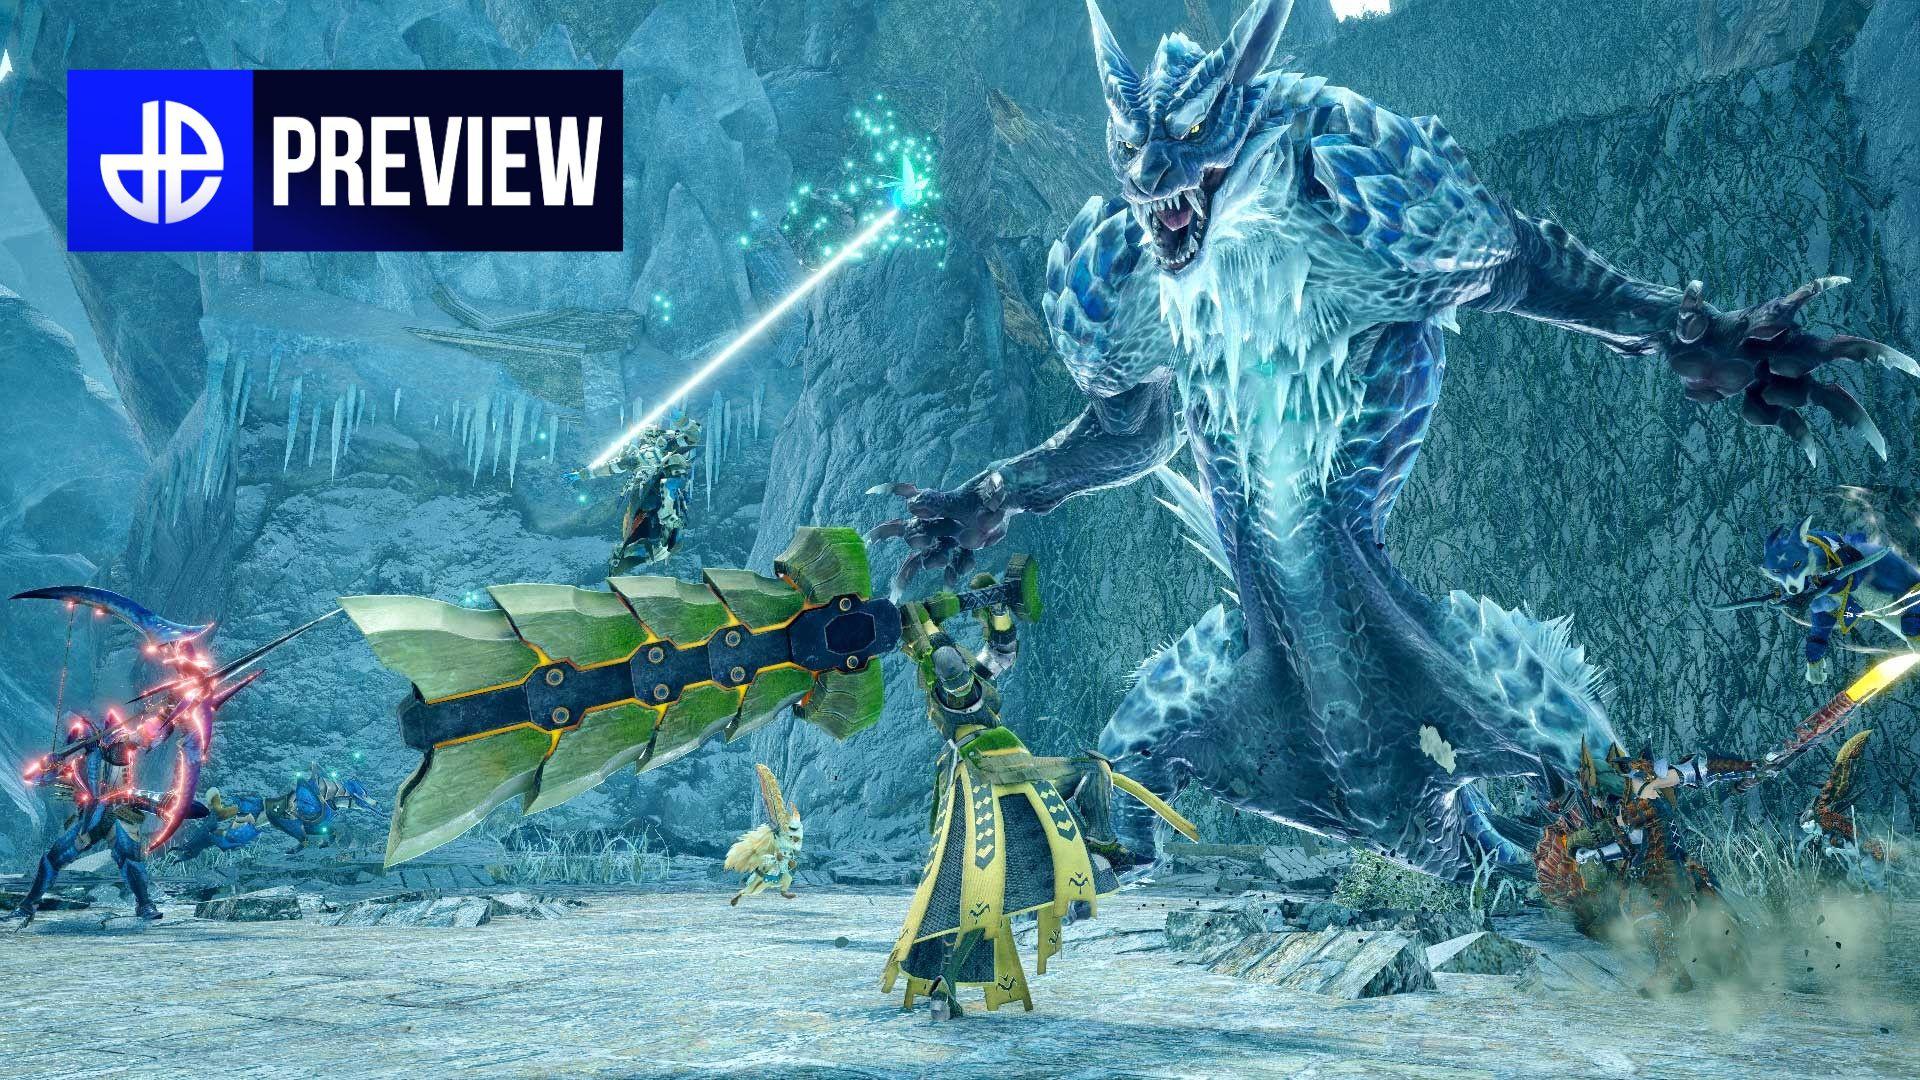 Monster Hunter Rise Review - Taking The Series to New Heights